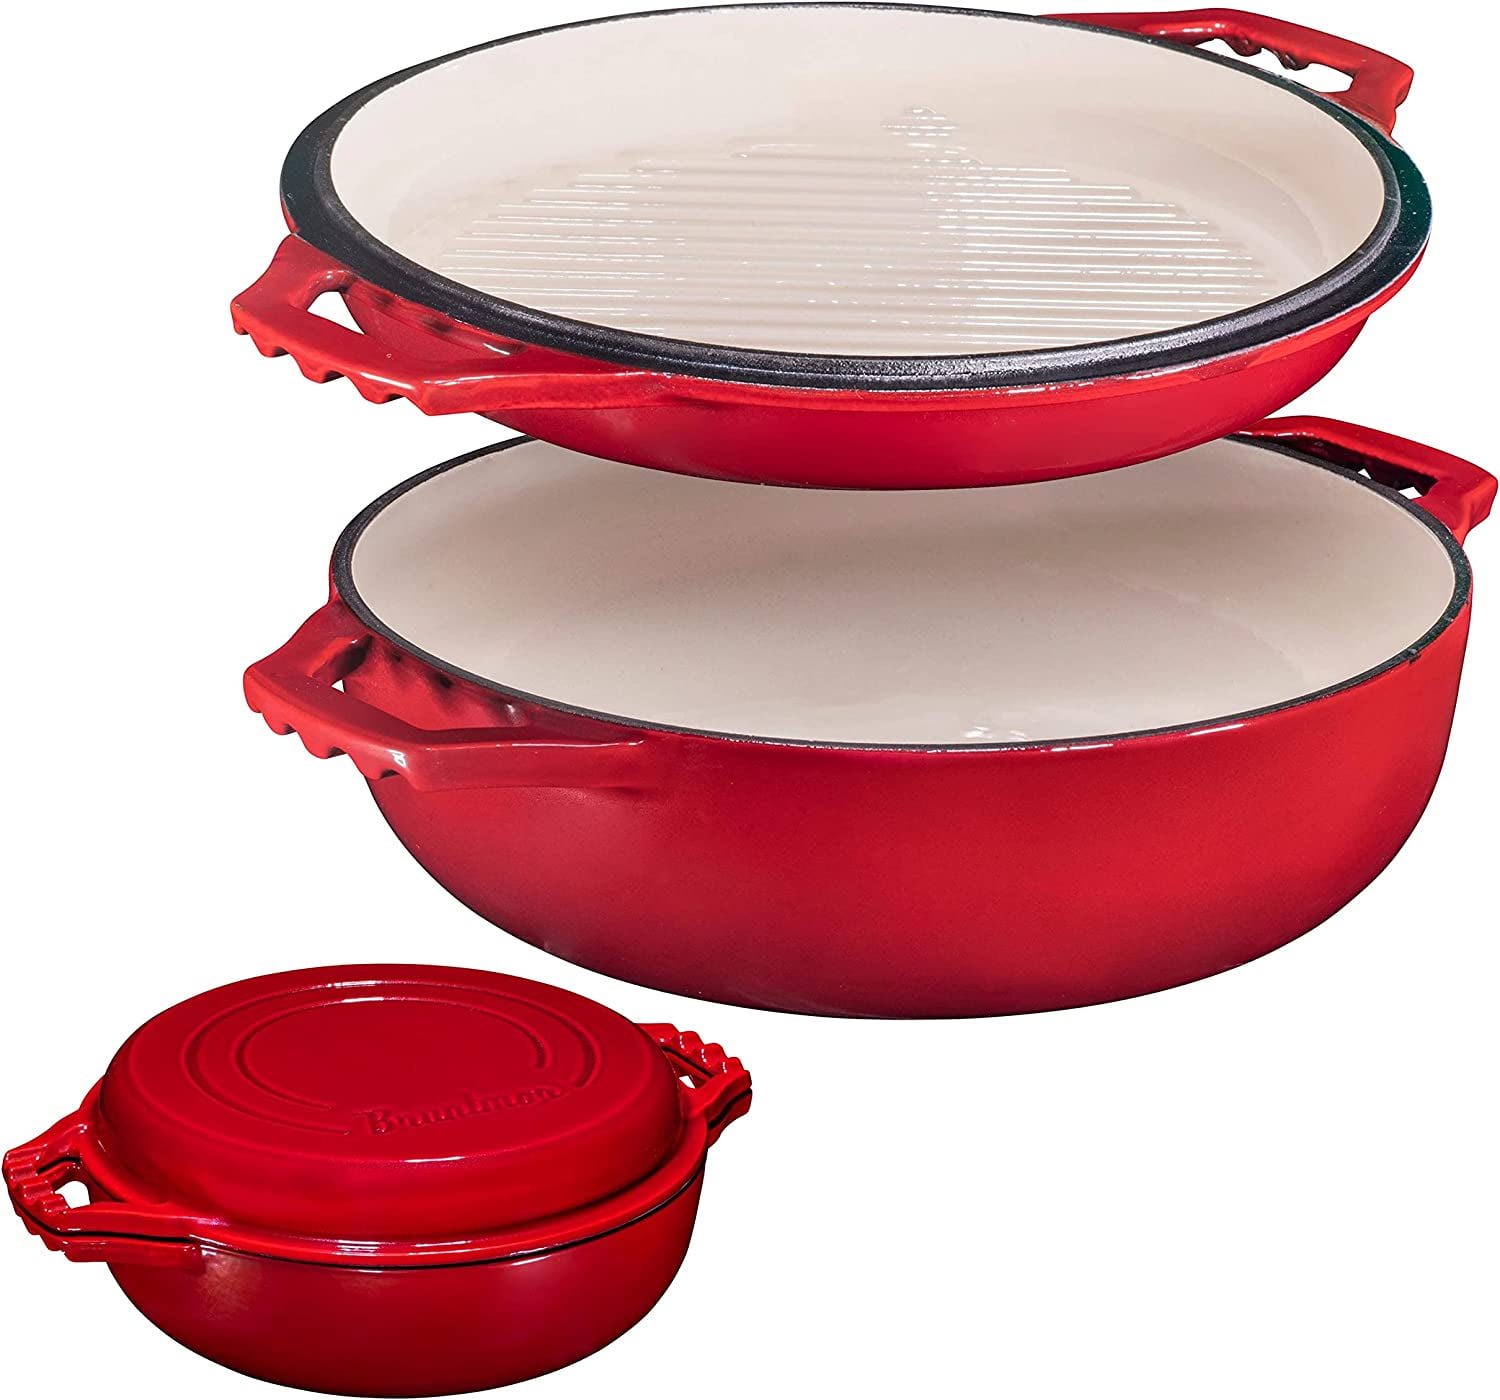 EDGING CASTING Enameled Cast Iron Covered Dutch Oven with Dual Handle,  Dutch Ovens with Lid for Bread Baking, Safe to 500 degrees, 3.5 Quart,  Peacock